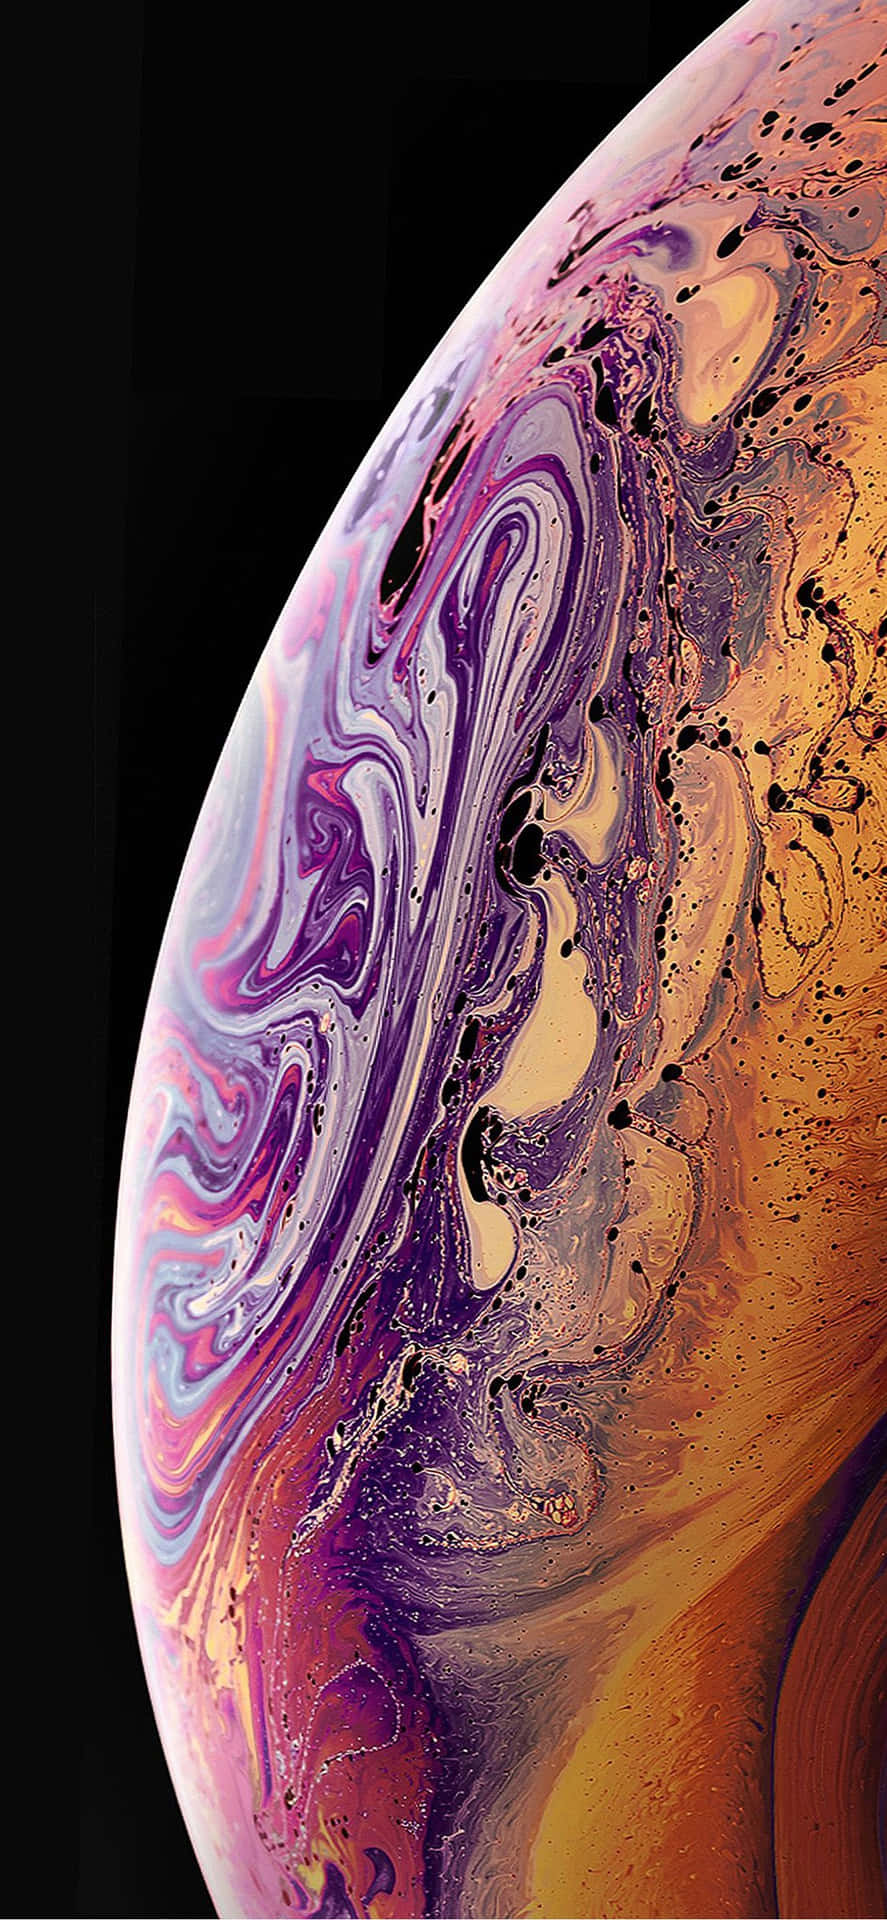 Get Your Hands On the Latest iPhone XR Wallpaper